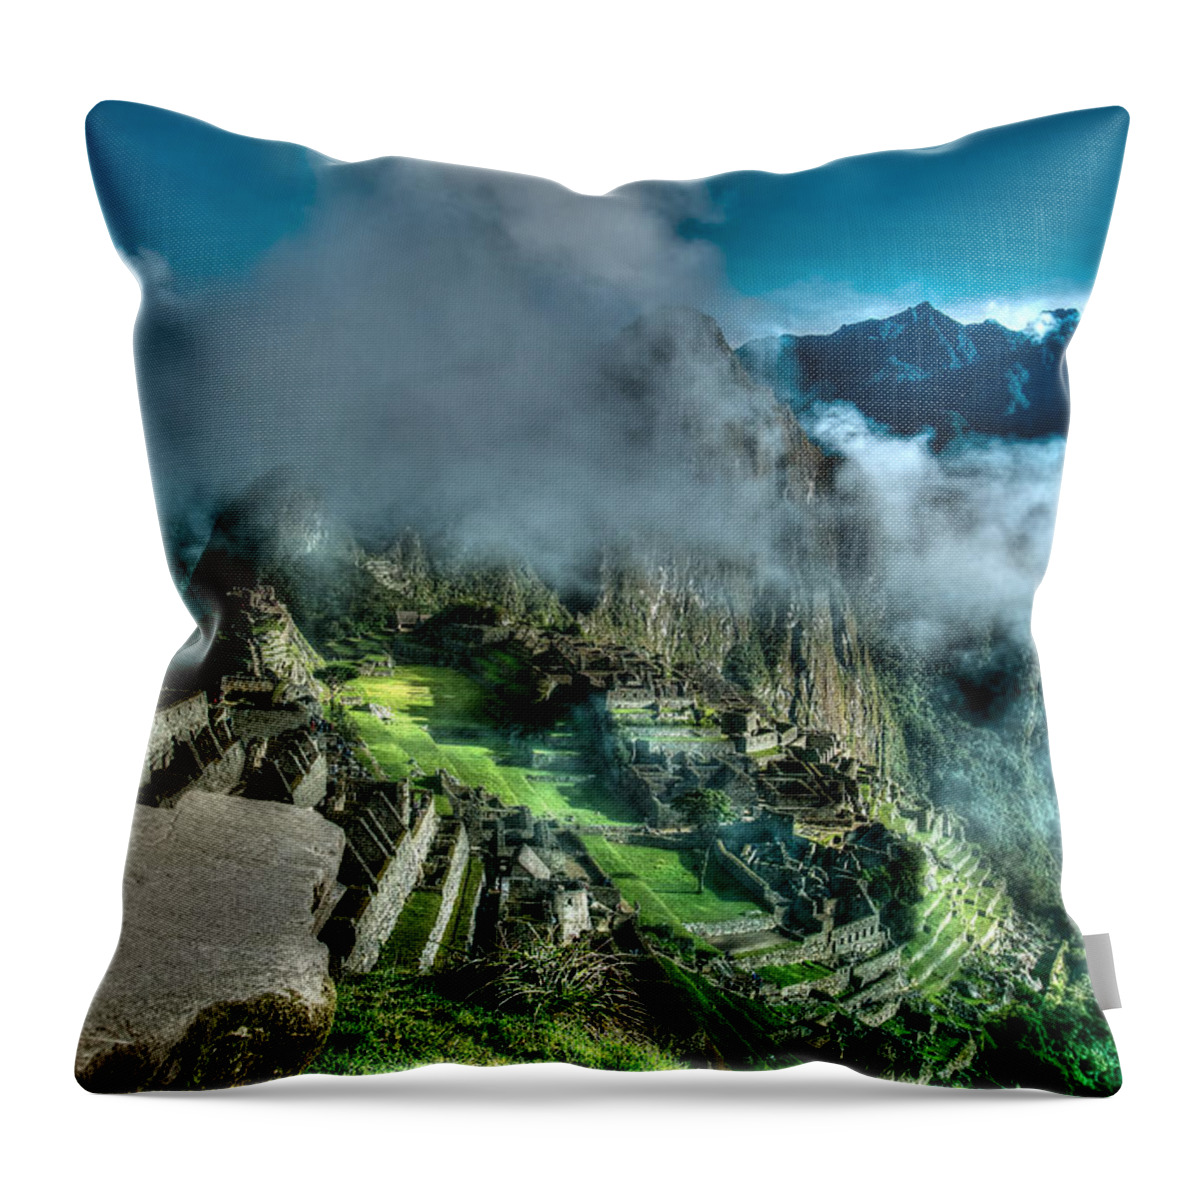 Photograph Throw Pillow featuring the photograph Above The Clouds by Richard Gehlbach